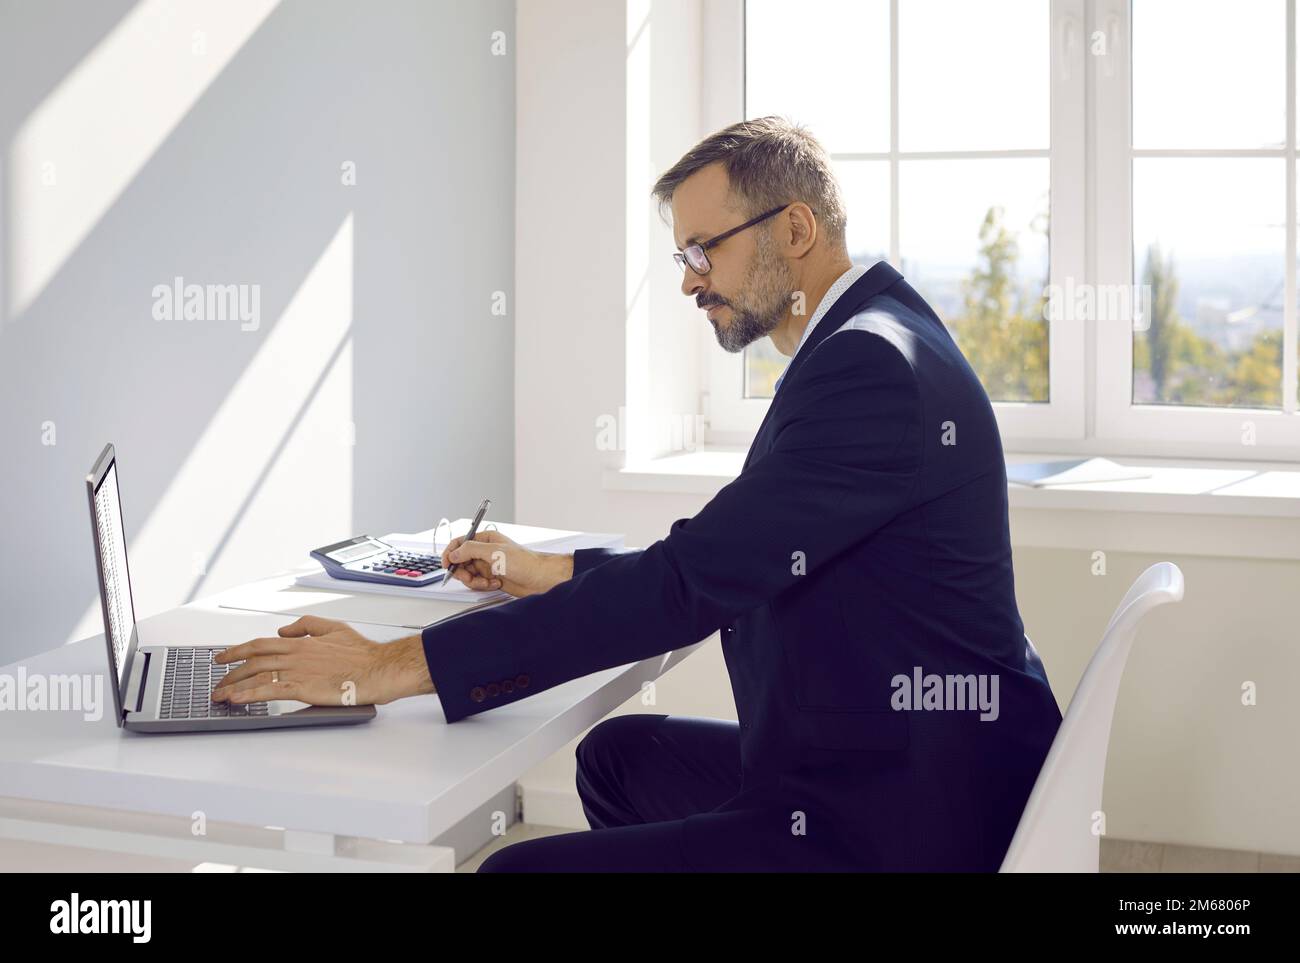 Mature man accountant or auditor working on laptop in office sitting at table, side view. Stock Photo